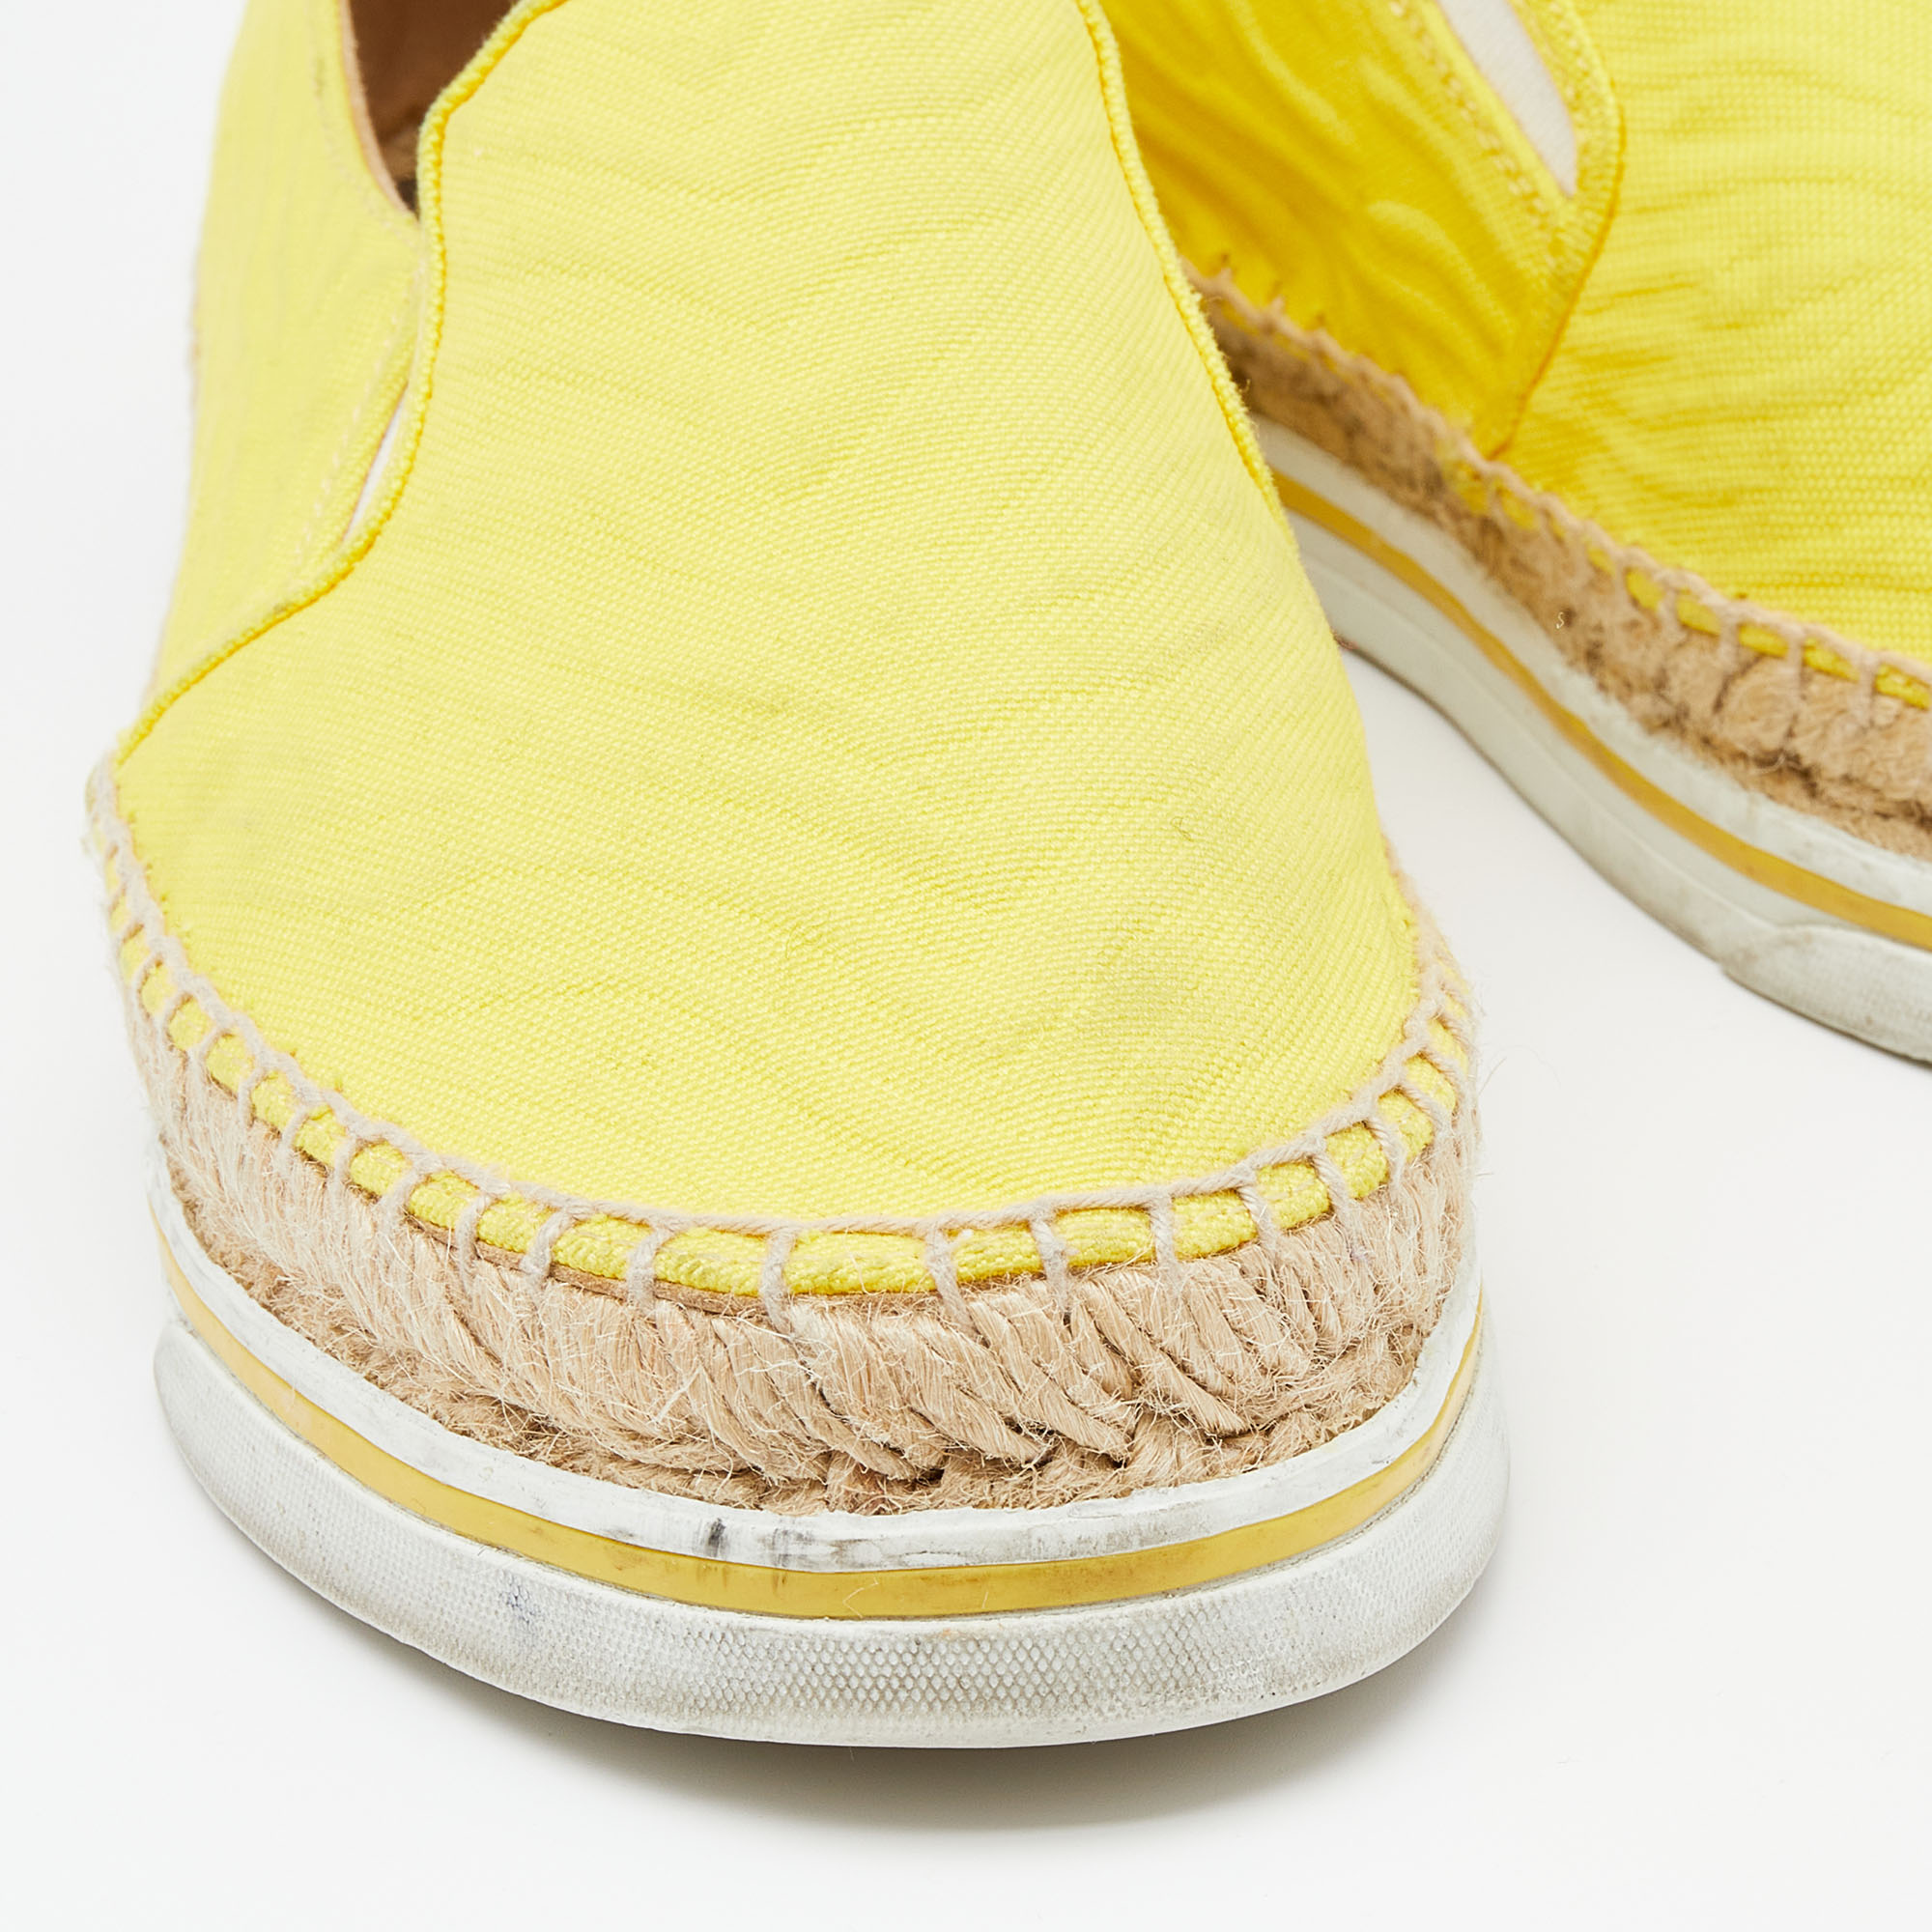 Jimmy Choo Yellow Canvas Dawn Slip On Espadrille Sneakers Size 35.5